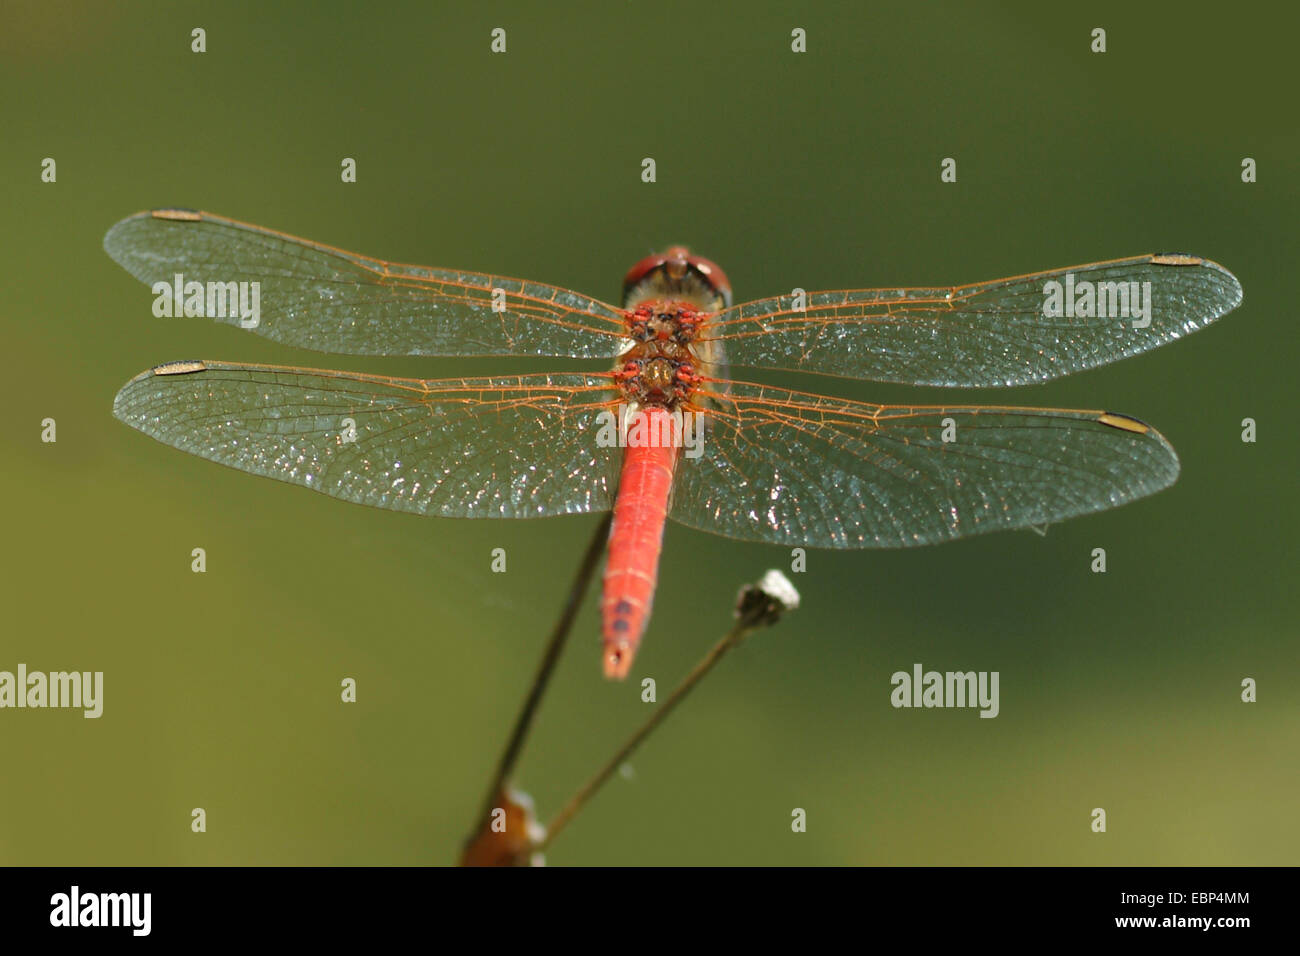 Red-veined sympetrum (Sympetrum fonscolombii, Sympetrum fonscolombei), male, Germany Stock Photo